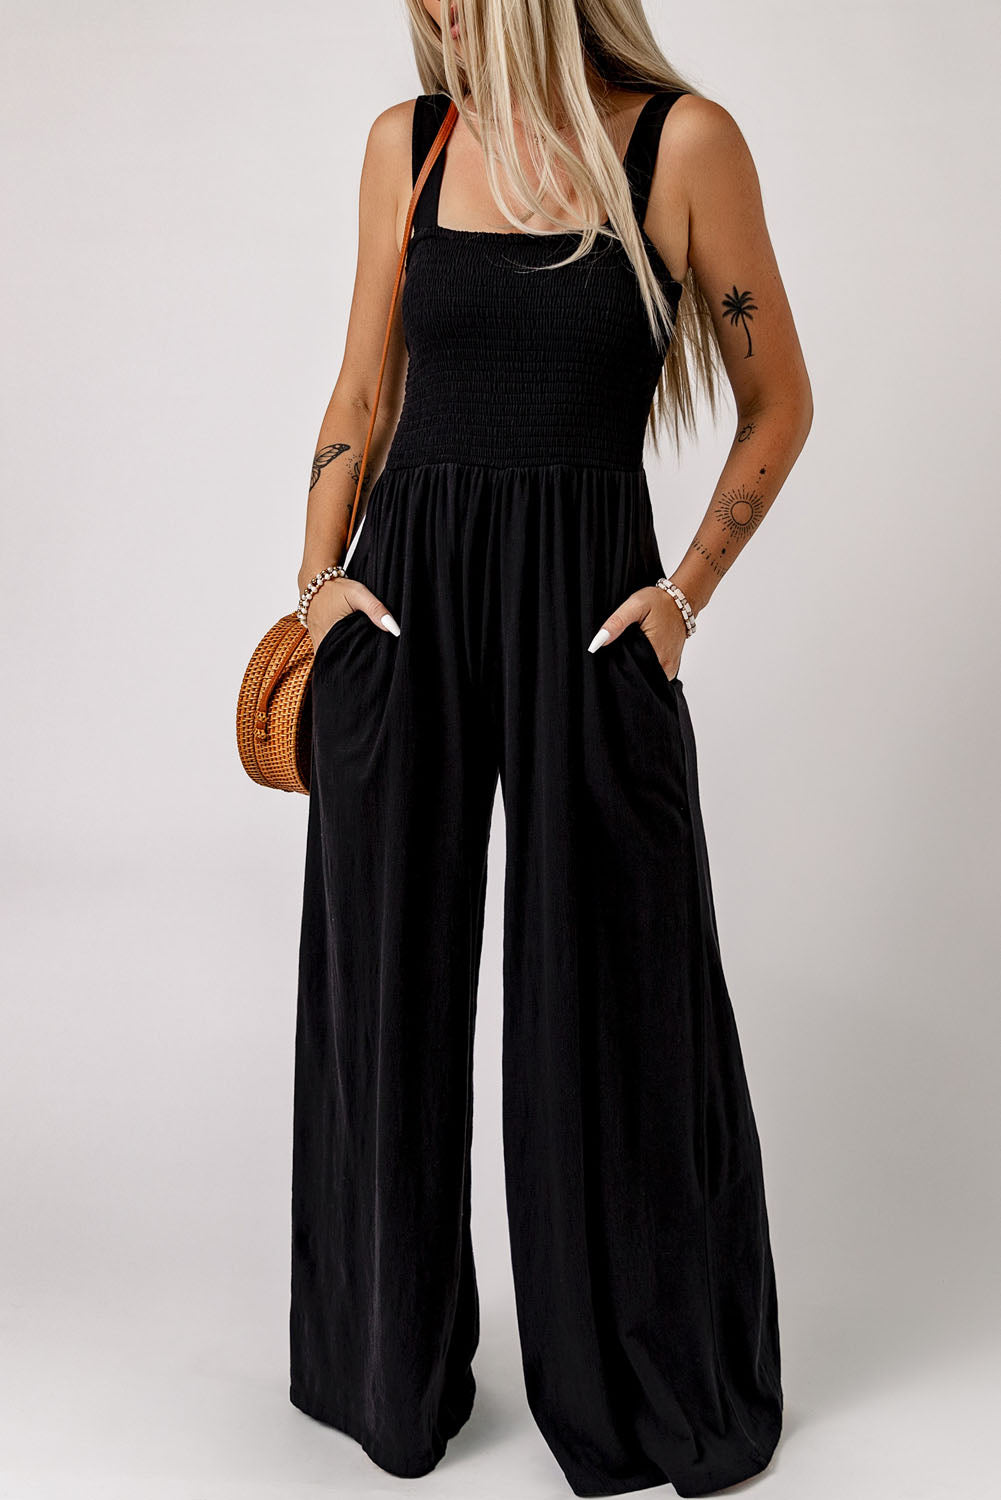 Like No Other Jumpsuit